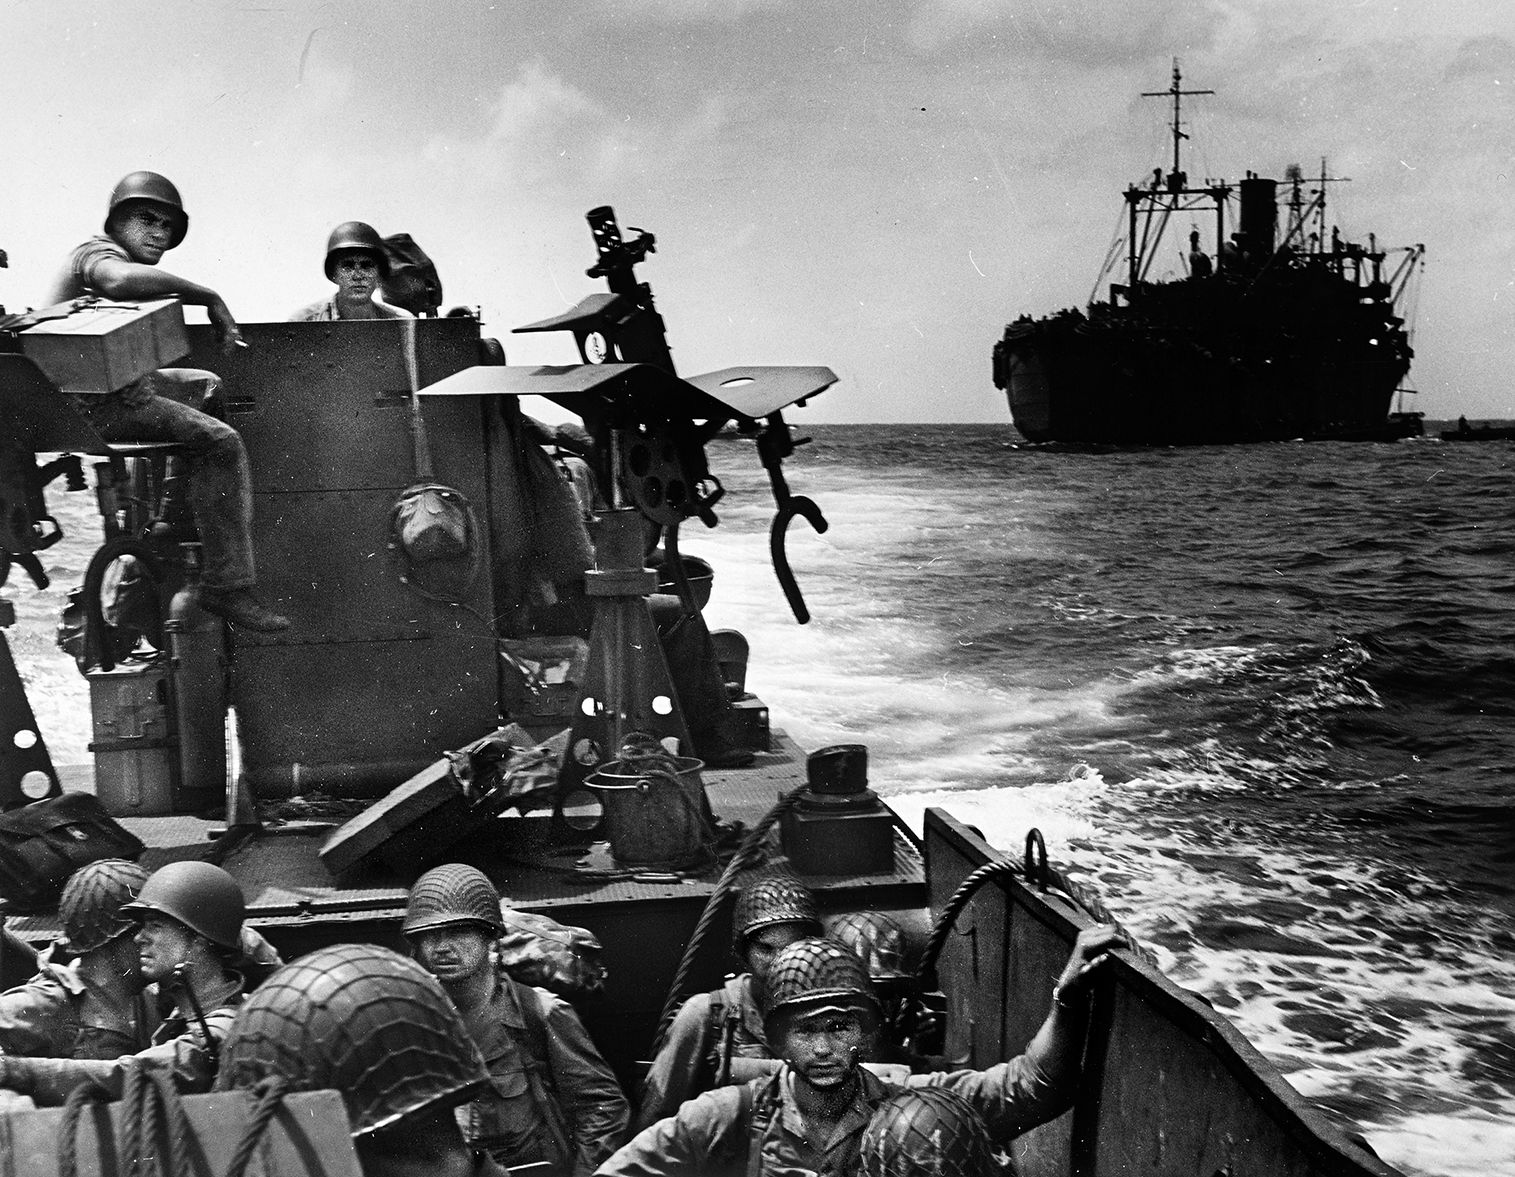 A tank lighter manned by U.S. Coast Guard personnel makes it way toward shore at Makin while hauling a heavy gun and tractor. The ship in the background is a combat transport also manned by Coast Guardsmen in service with the U.S. Navy task force. As this photo was taken, American bombers were hitting targets on the islet of Butaritari. 